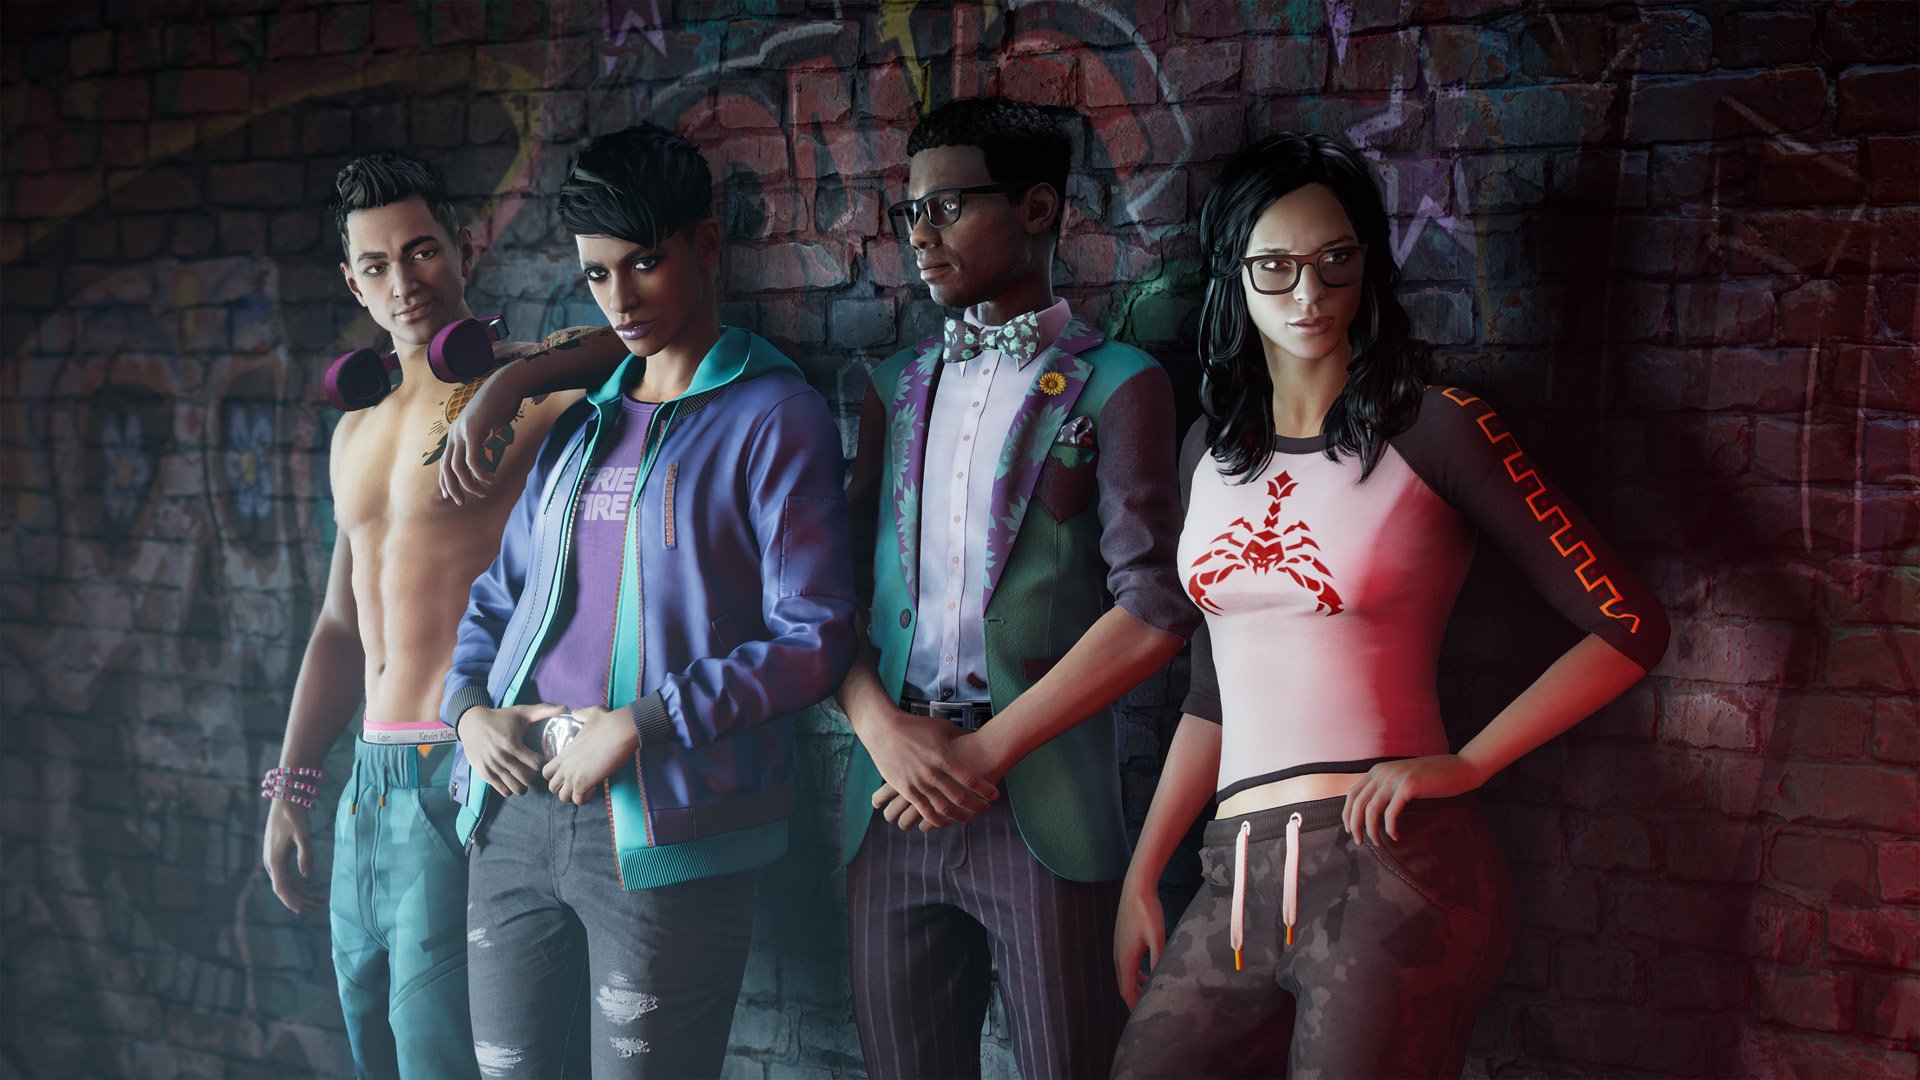 new-saints-row-video-offers-a-look-at-actual-gameplay-following-fan-criticism-vgc